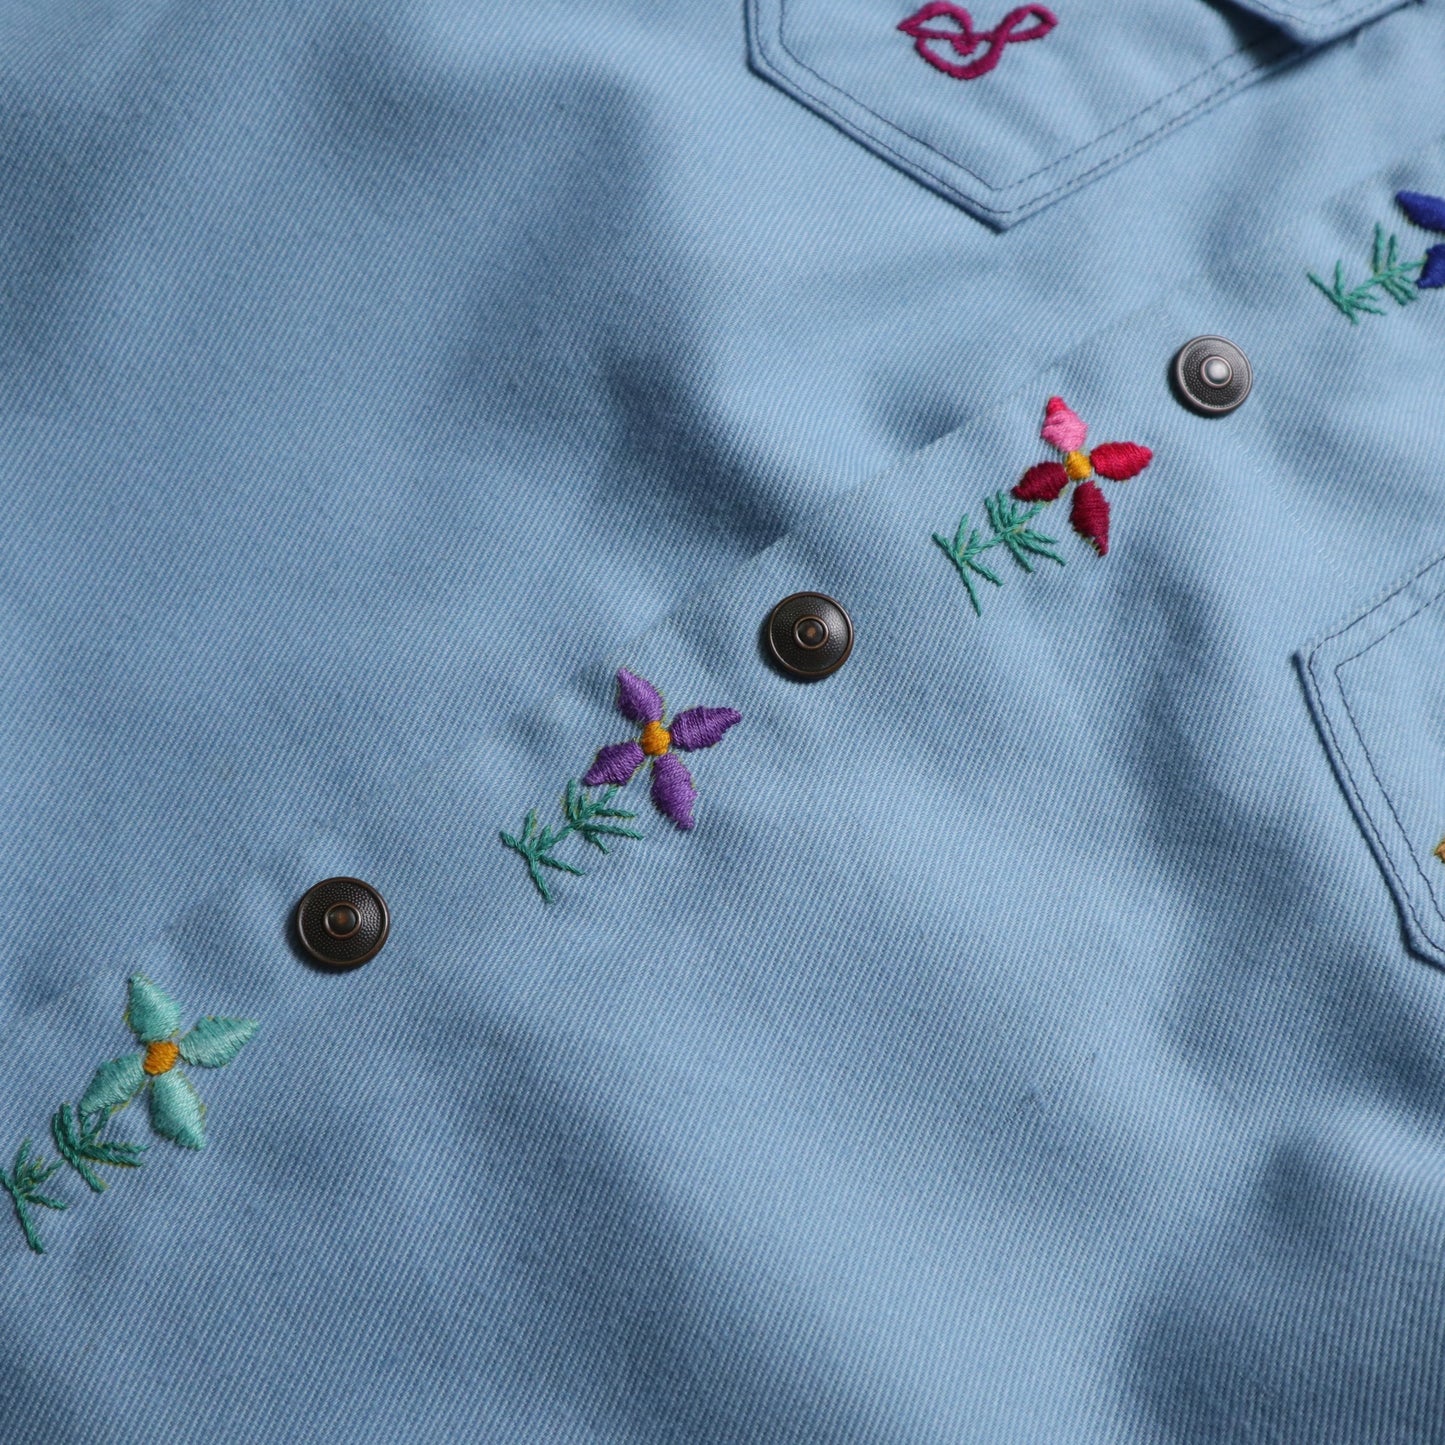 1970s American hand embroidered floral shirt